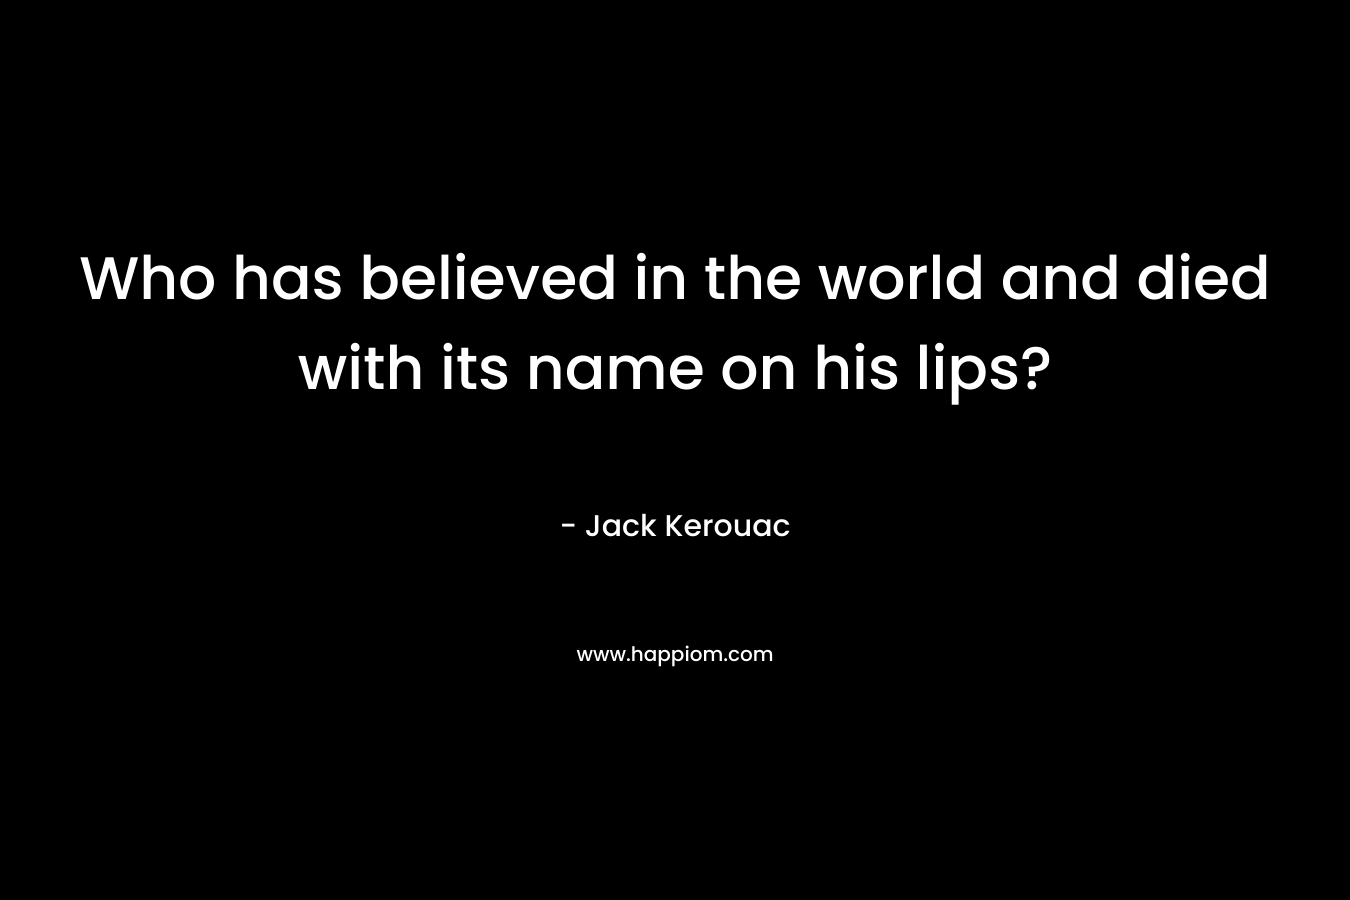 Who has believed in the world and died with its name on his lips?